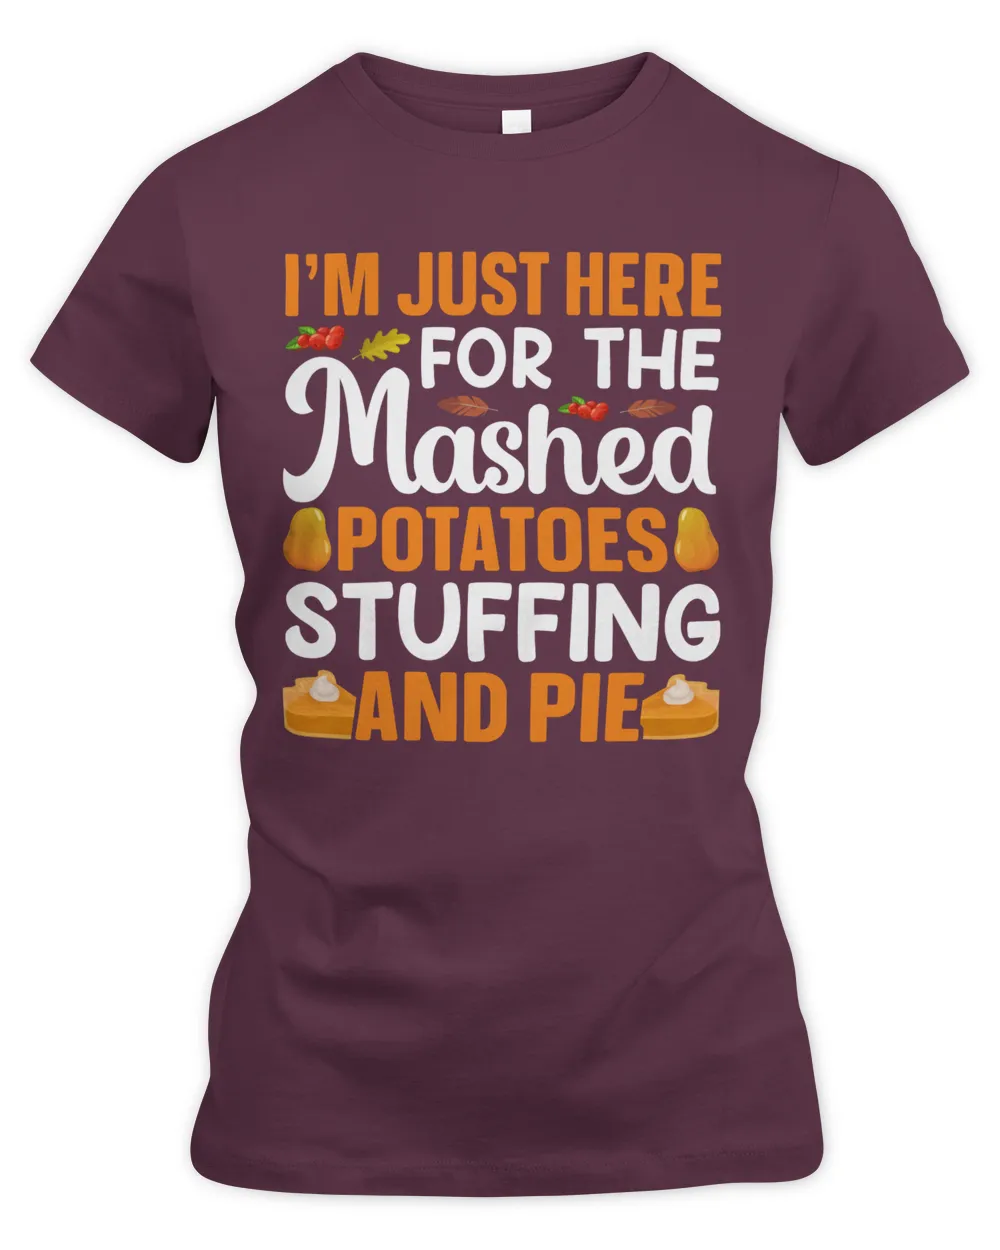 I'm just here for the mashed potatoes stuffing and pie